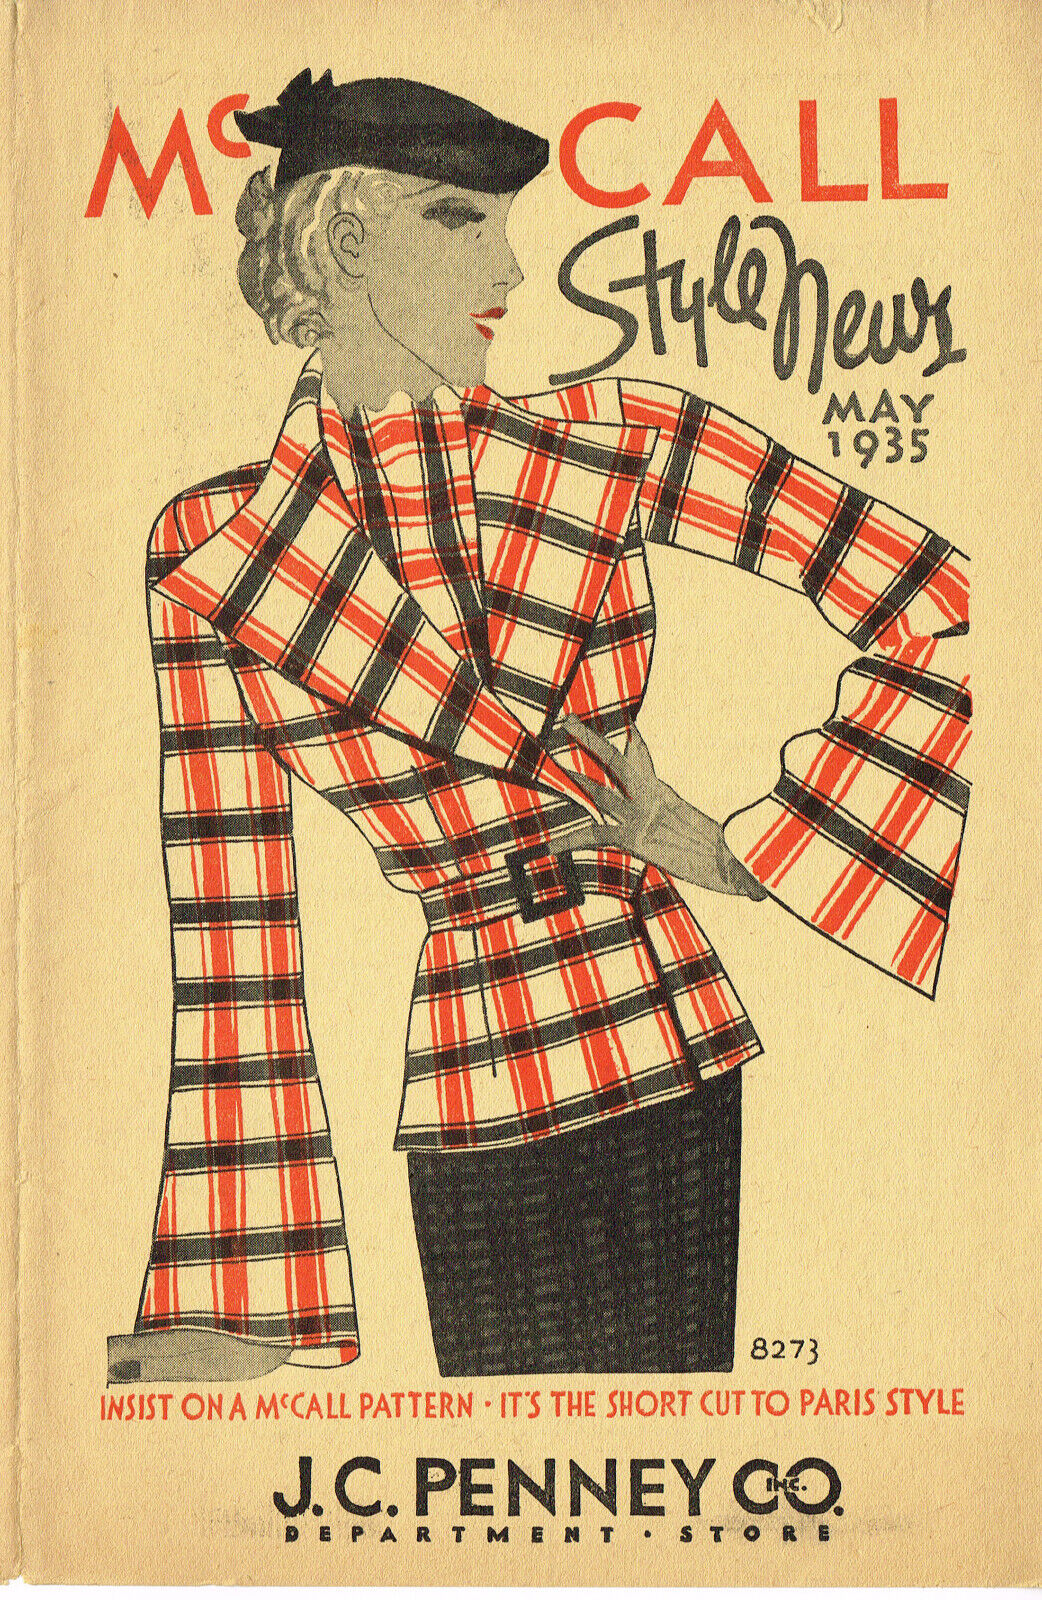 Ebook on CD McCall Fashion News 32 Page Flyer May 1935 Sewing Pattern Catalog